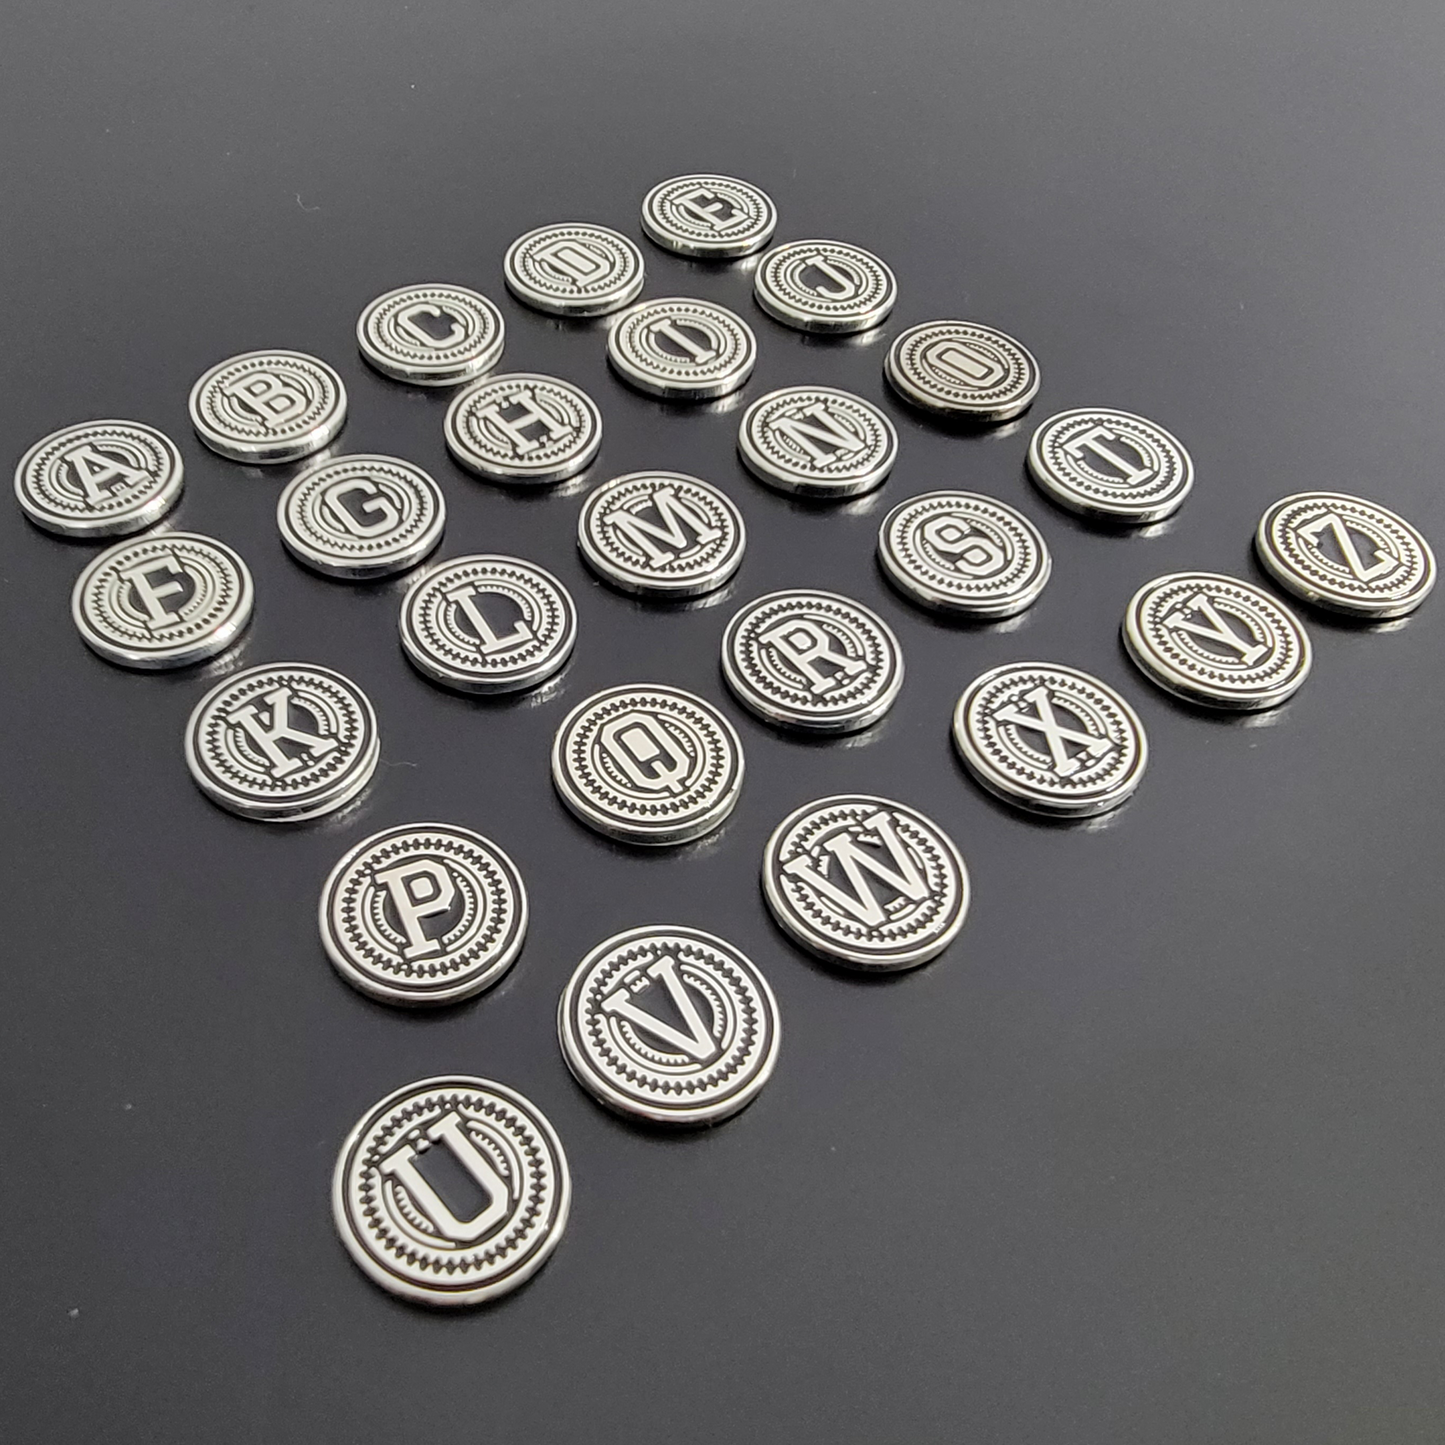 Real Silver Plated Grips Emblems 13 mm Medallions